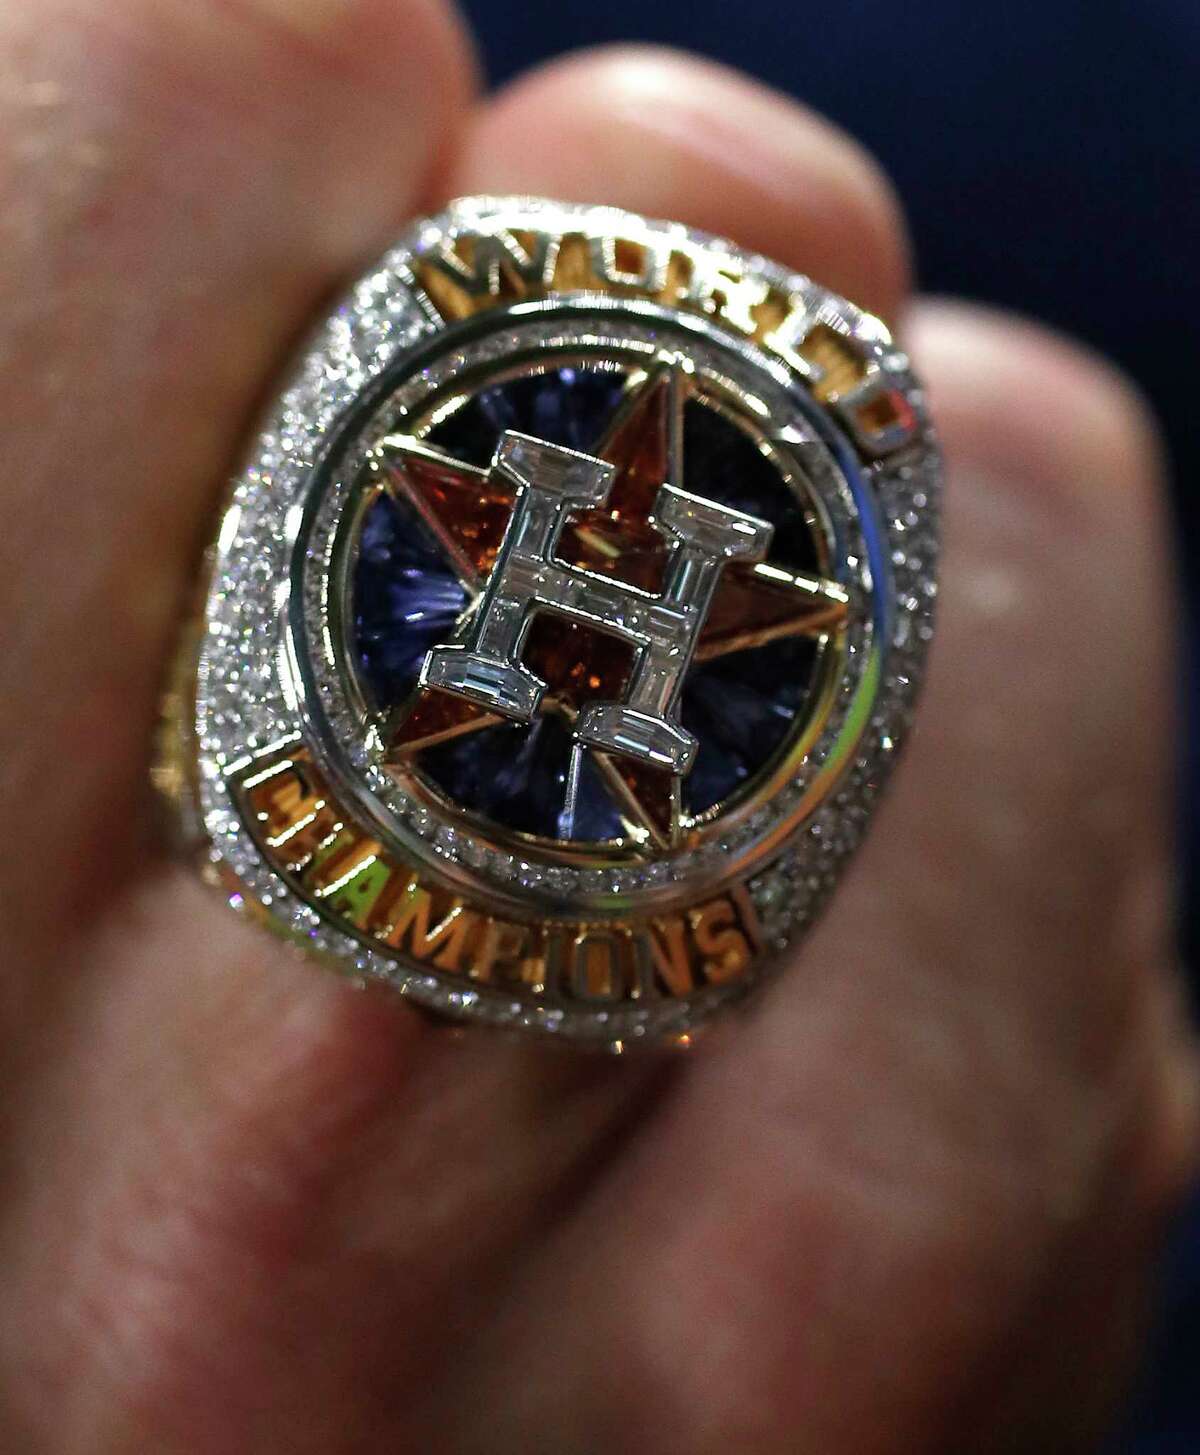 Astros to sell 112 World Championship fan rings - ABC13 Houston